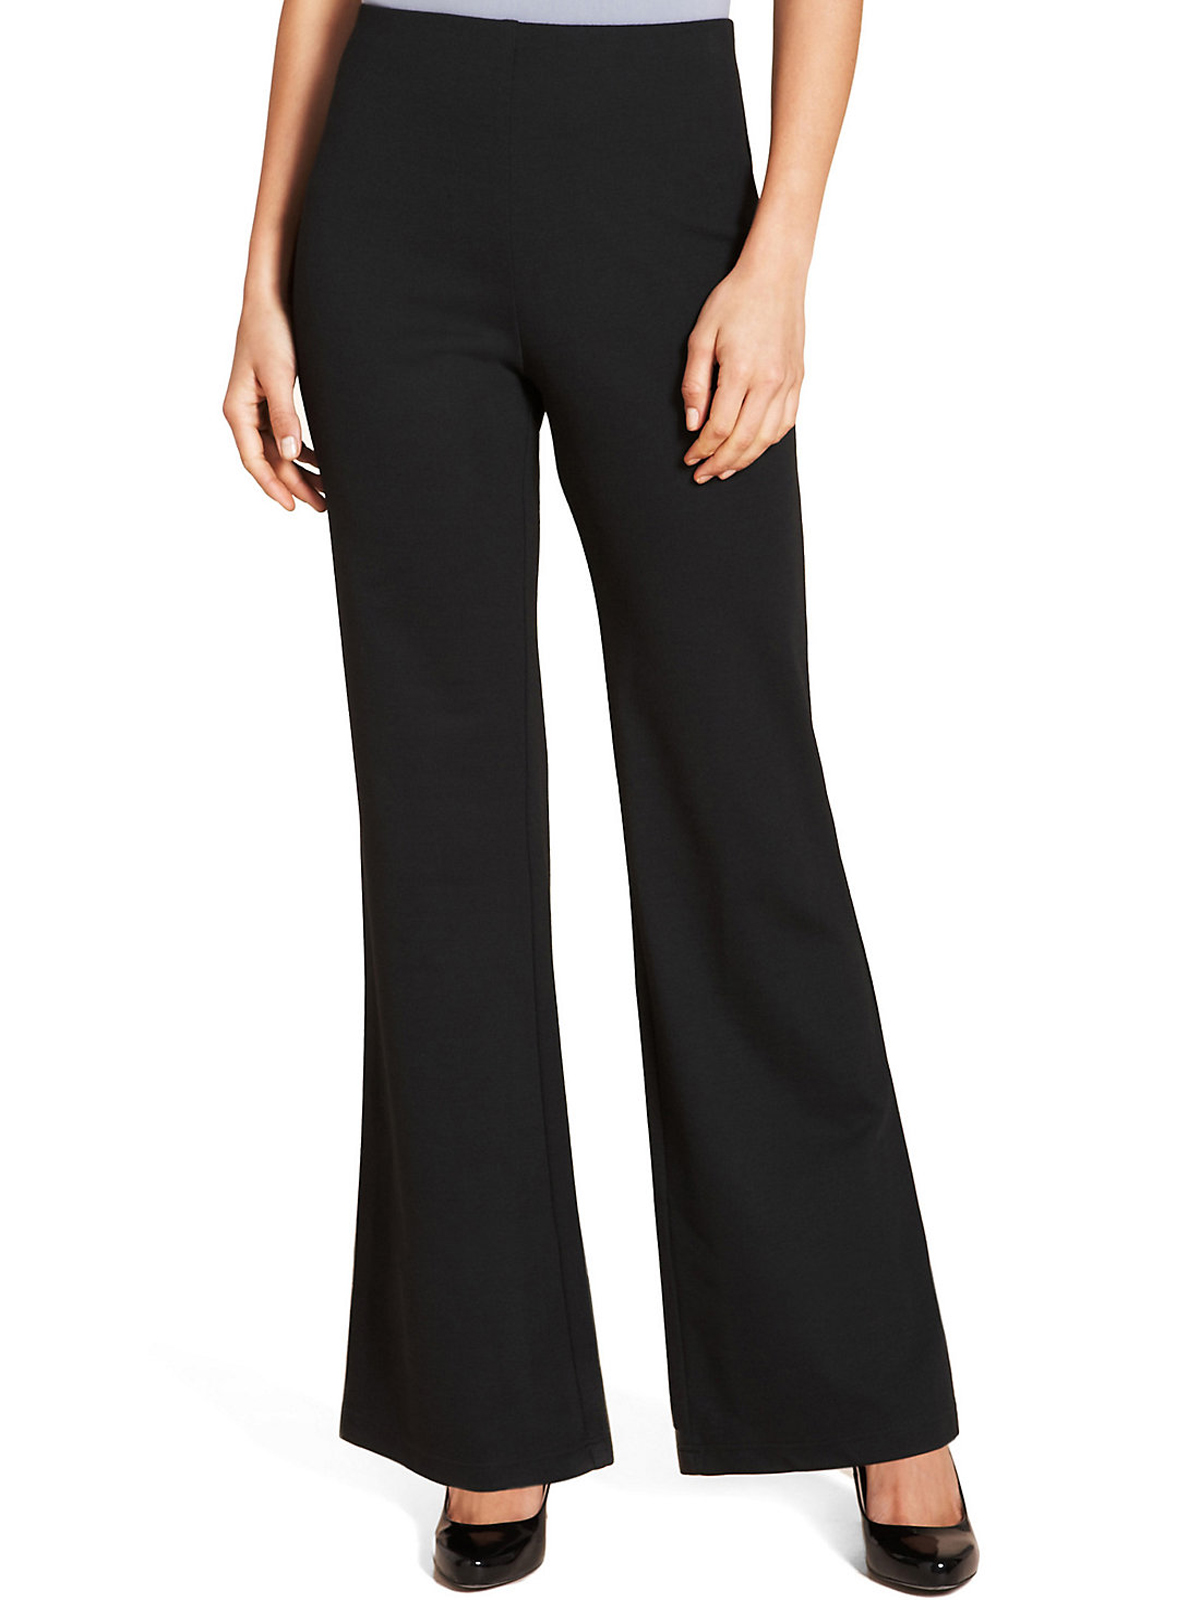 Marks and Spencer - - M&5 ASSORTED Ladies Trousers - Size 8 to 14